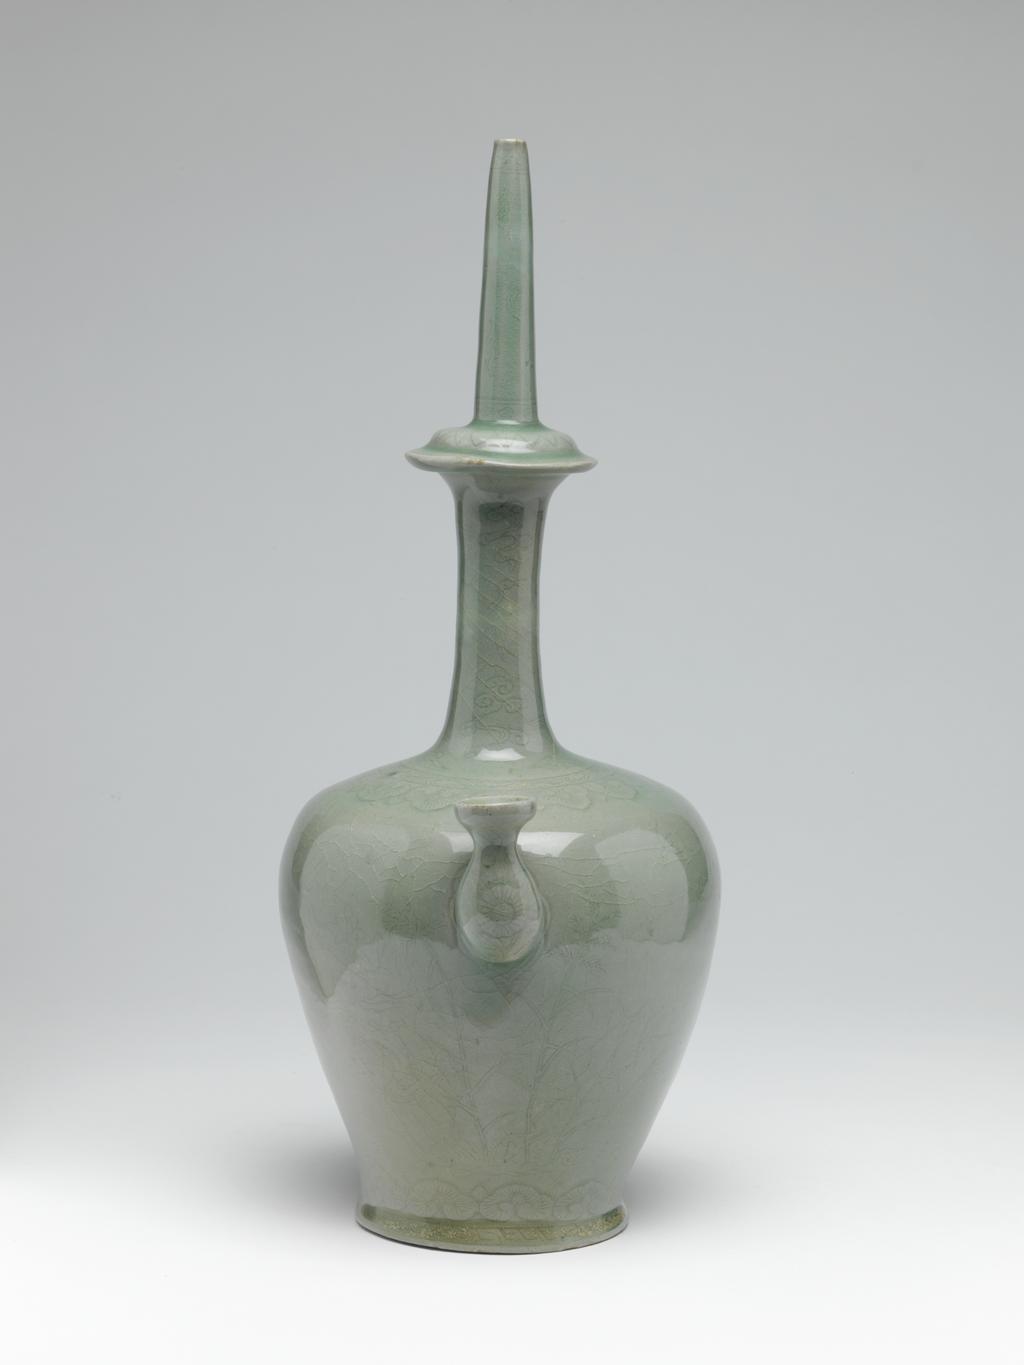 An image of Chongbyong. Kundika with willow and waterfowl design. This vessel has an ovoid body with a small spout on one side, and a long neck, with a flanged swelling in the centre. The lower part of the body contracts to a splayed footring, giving it a stable shape. The upper part of the long neck is cut into octagonal form, and has incised cloud motifs on each facet, while the projecting ring shows lotus petals and scrolling foliage. The lower part of the neck is decorated with flying cranes among clouds. A classic-scroll border and youi-heads are finely incised round the shoulder, and a key-fret border and further youi-heads round the foot. The body itself shows willow trees on one side and reeds on the other, with ducks and lotuses, flying cranes and geese delicately engraved between. Production Notes: This type of kundika, which is modelled on bronze examples decorated with silver inlay, was very popular in the Koryo dynasty. Both shape and design are very similar to the metal counterparts. The kundika (Chongbyong) was used in Buddhist ceremonies as a container for water, which was filled in through the spout and sprinkled from the narrow mouth. Similar sherds were excavated at kiln no.7, Sadang-ri, Kangjin-gun, South Cholla province, and were produced in the mature period of Koryo celadon, in the first half of the twelfth century. Production Place: Sadang-ri kilns. Kangjin-gun. South Cholla province. Korean. Stoneware, thrown, with applied lugs, incised and celadon-glazed, height (whole) 34.7 cm, diameter (maximum) 16.0 cm, diameter (foot) 9.0 cm, circa 1101 to 1150. Koryo Dynasty.